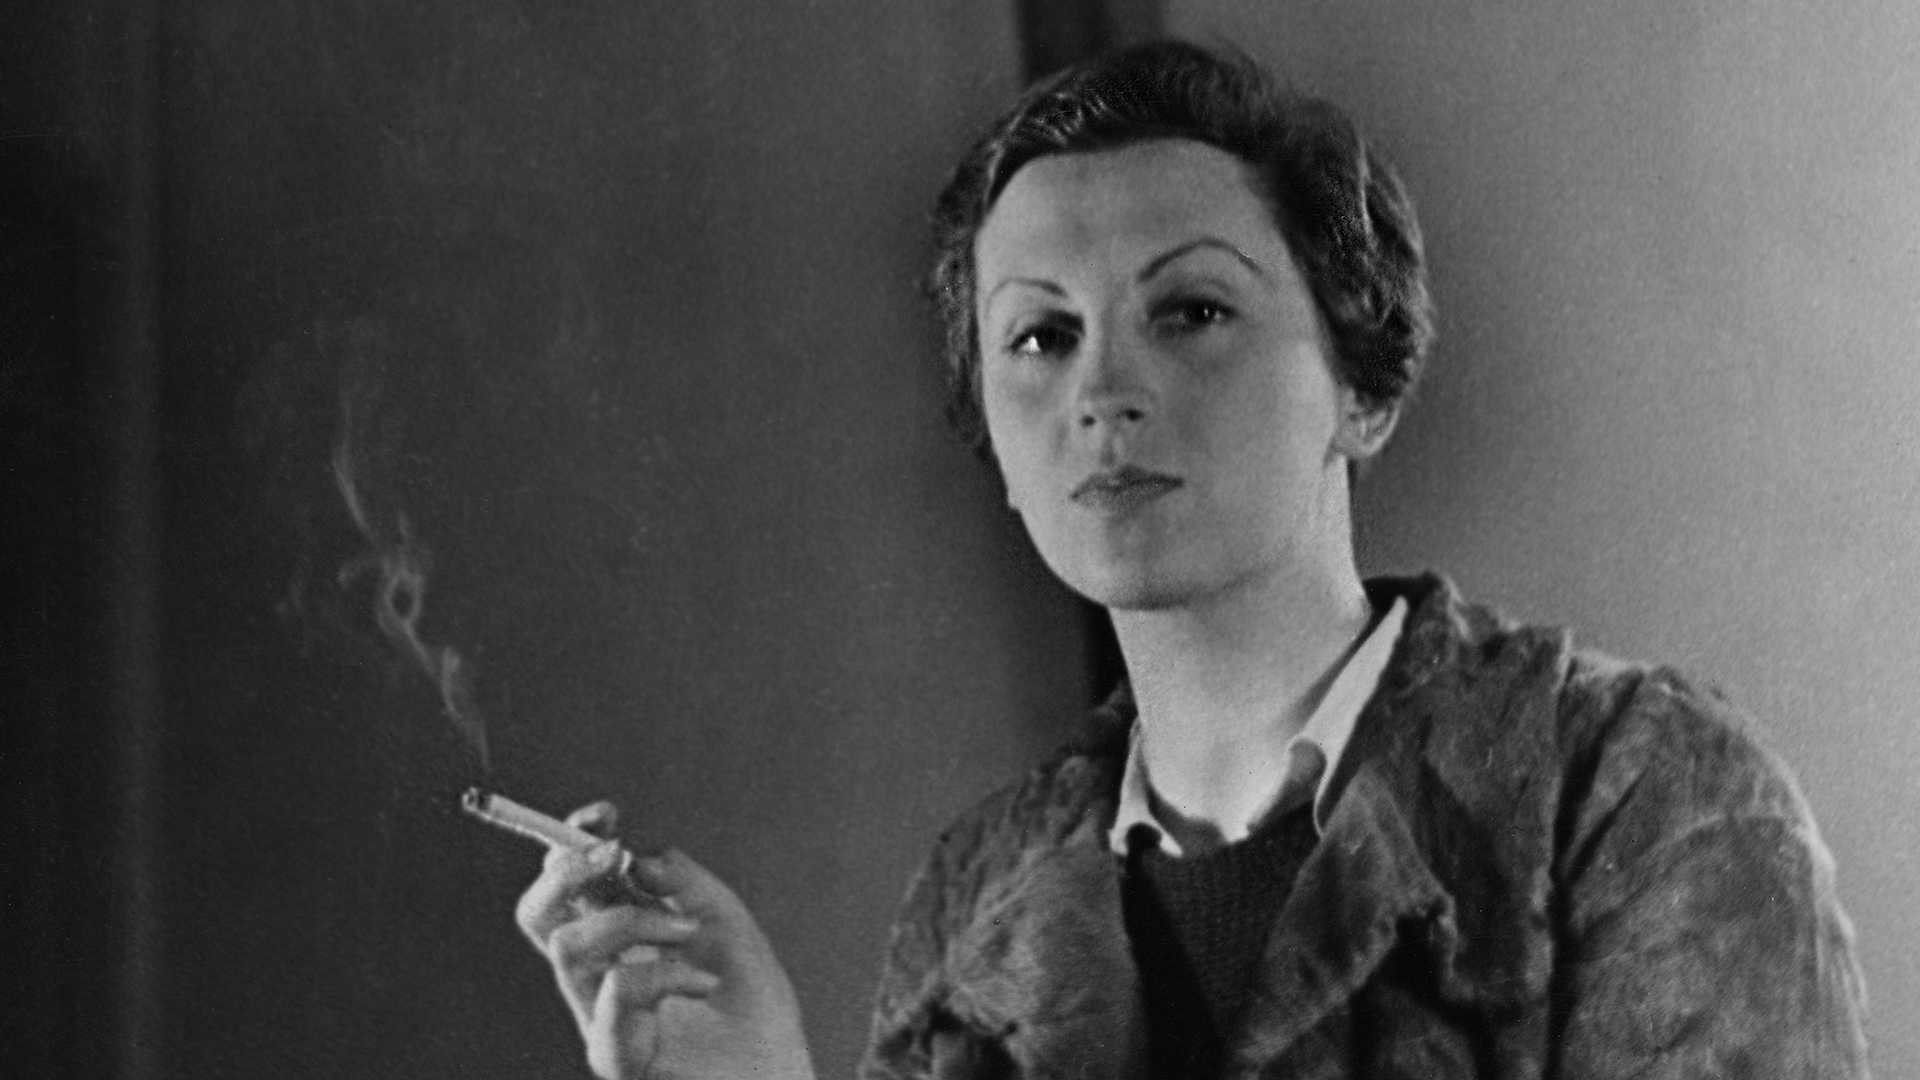 Portrait of German photographer Gerda Taro (born Gerta Pohorylle, 1910 - 1937) as she smokes a cigarette, seated behind a typewriter on a desk, Paris, France, 1936. (Photo by Fred Stein Archive/Getty Images)